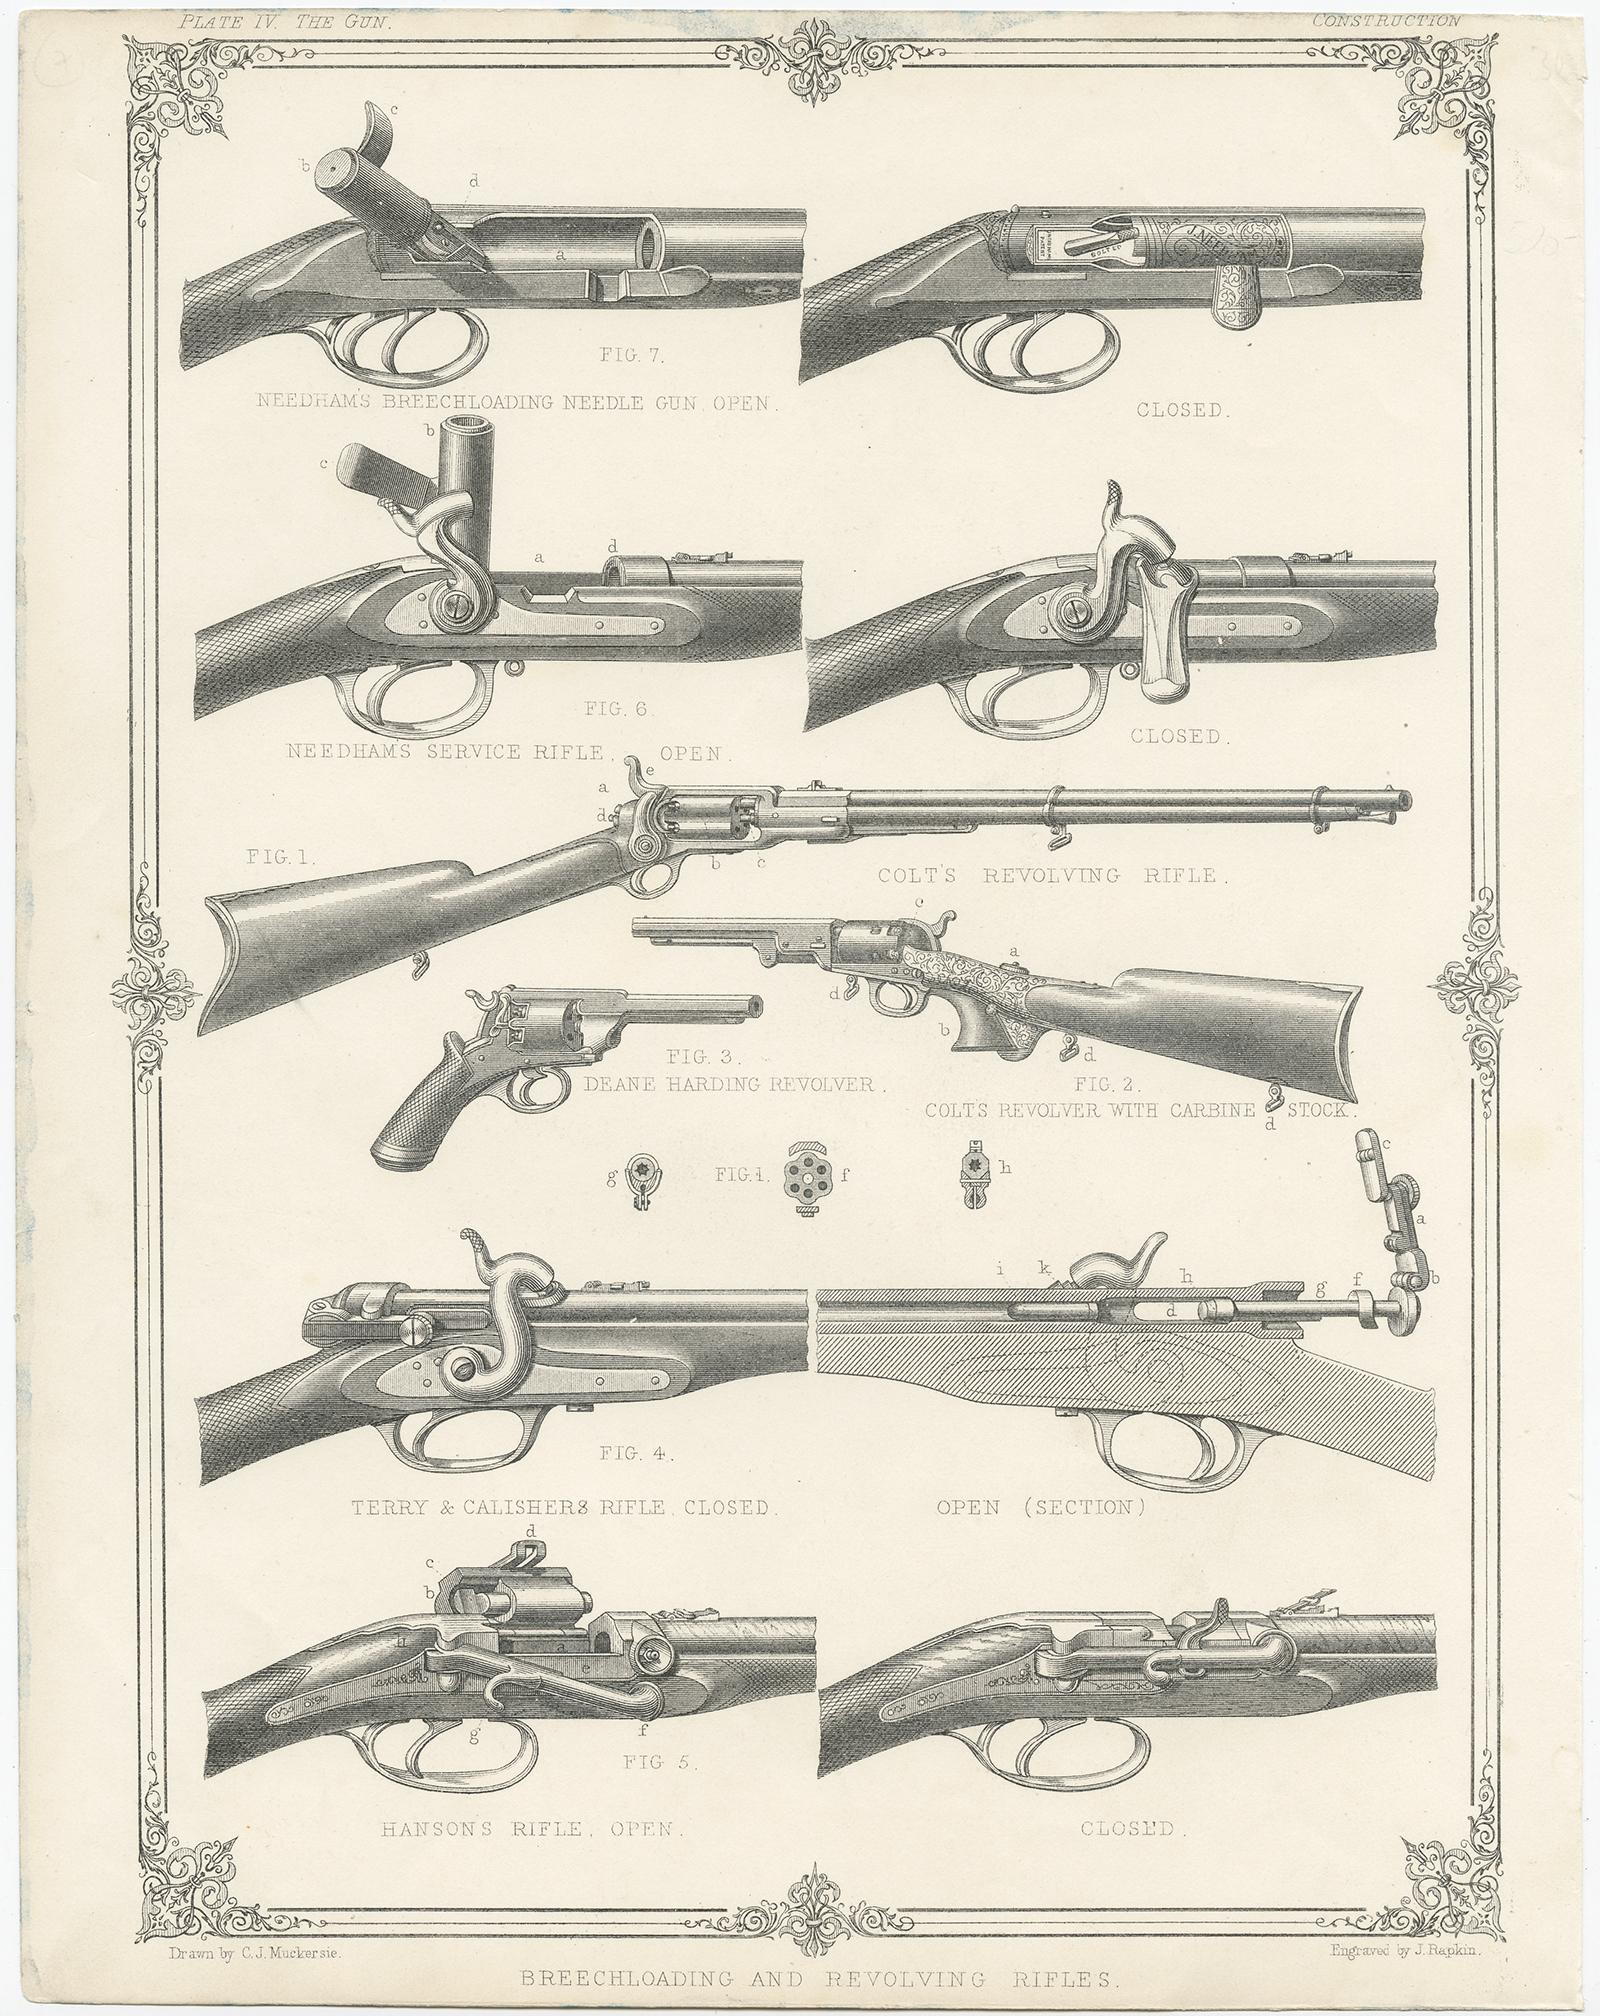 Antique print titled 'Pl. IV The Gun - Breechloading and Revolving Rifles'. This print depicts Colt's revolving rifle, Colts revolver with carbine stock, Deane harding revolver, Terry & Calishers Rifle closed, Hanson's rifle open, Needham's Service